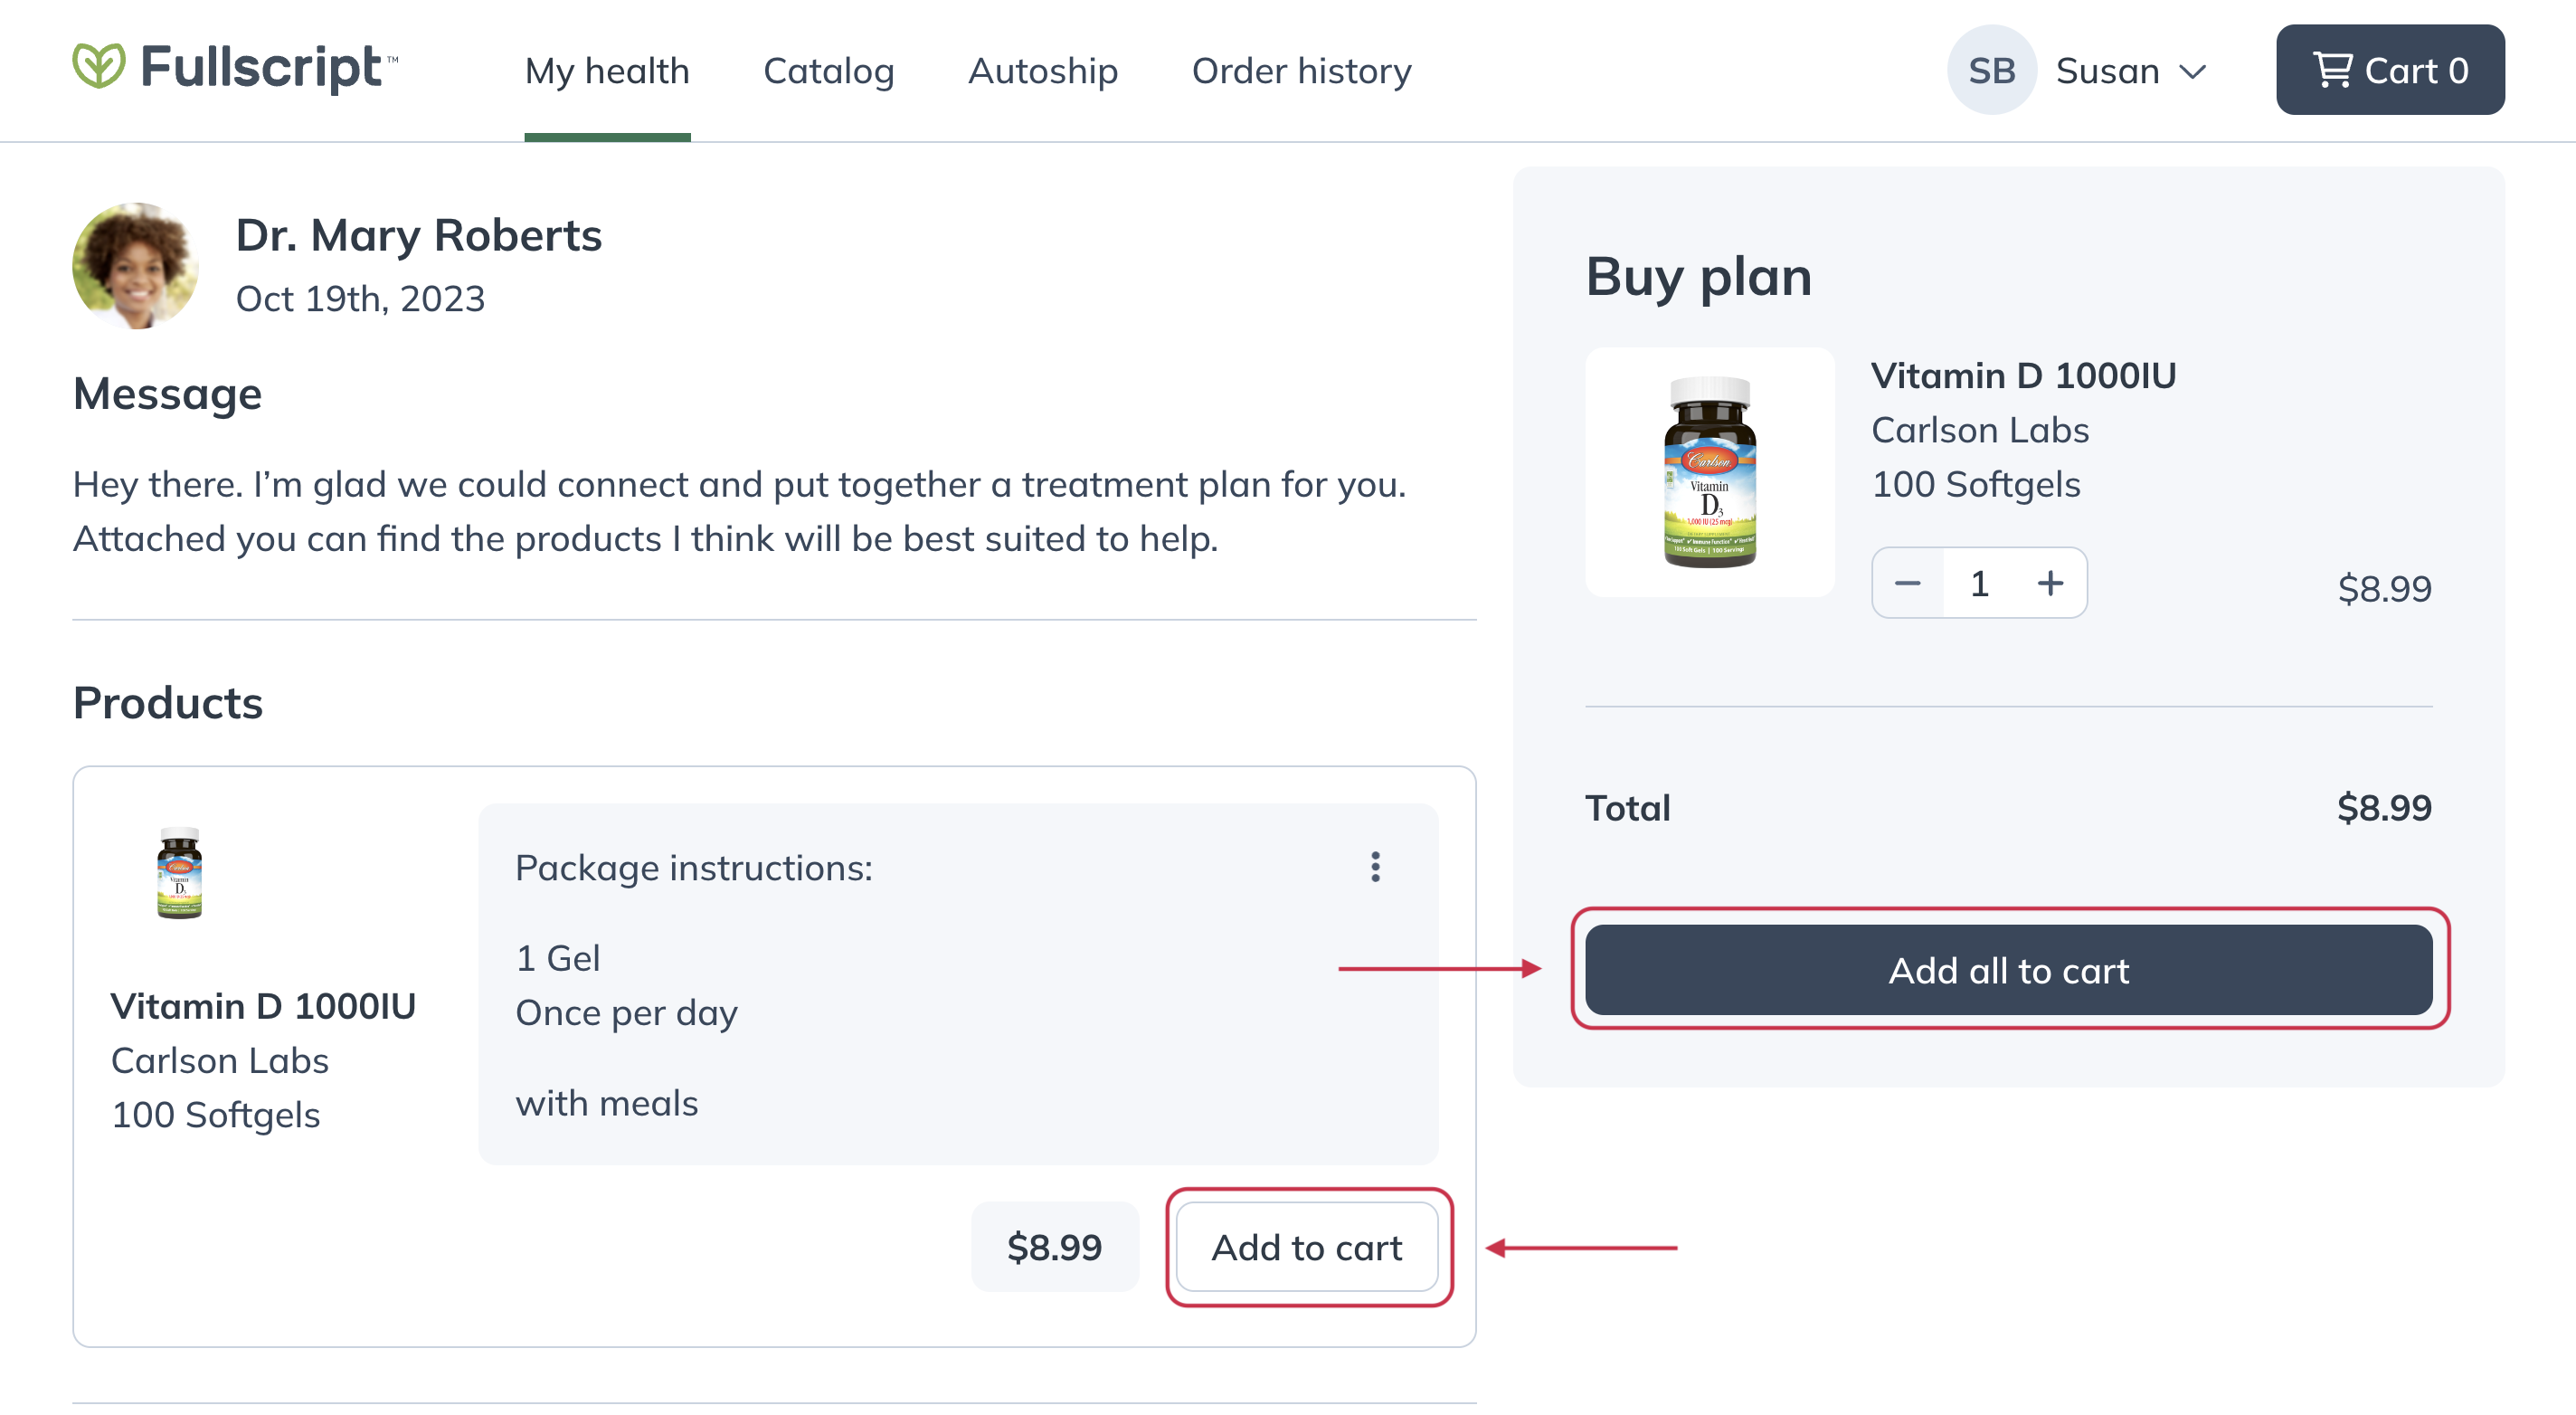  Adding products from a recommendation or prescription to the
        shopping cart